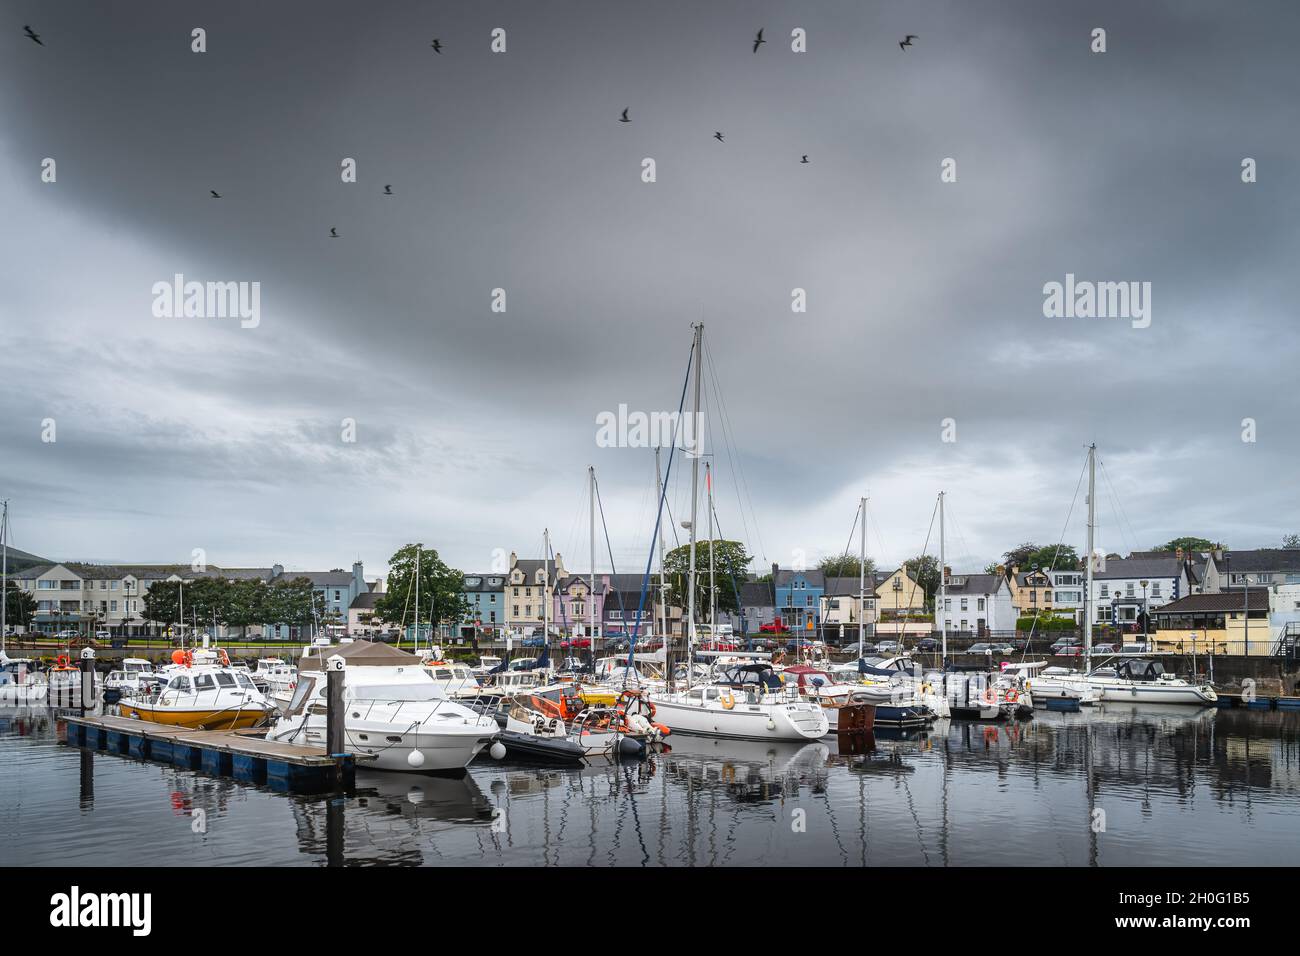 Yachts and sailboats moored in small, beautiful marina in Ballycastle town with birds flying over, Antrim, Northern Ireland Stock Photo